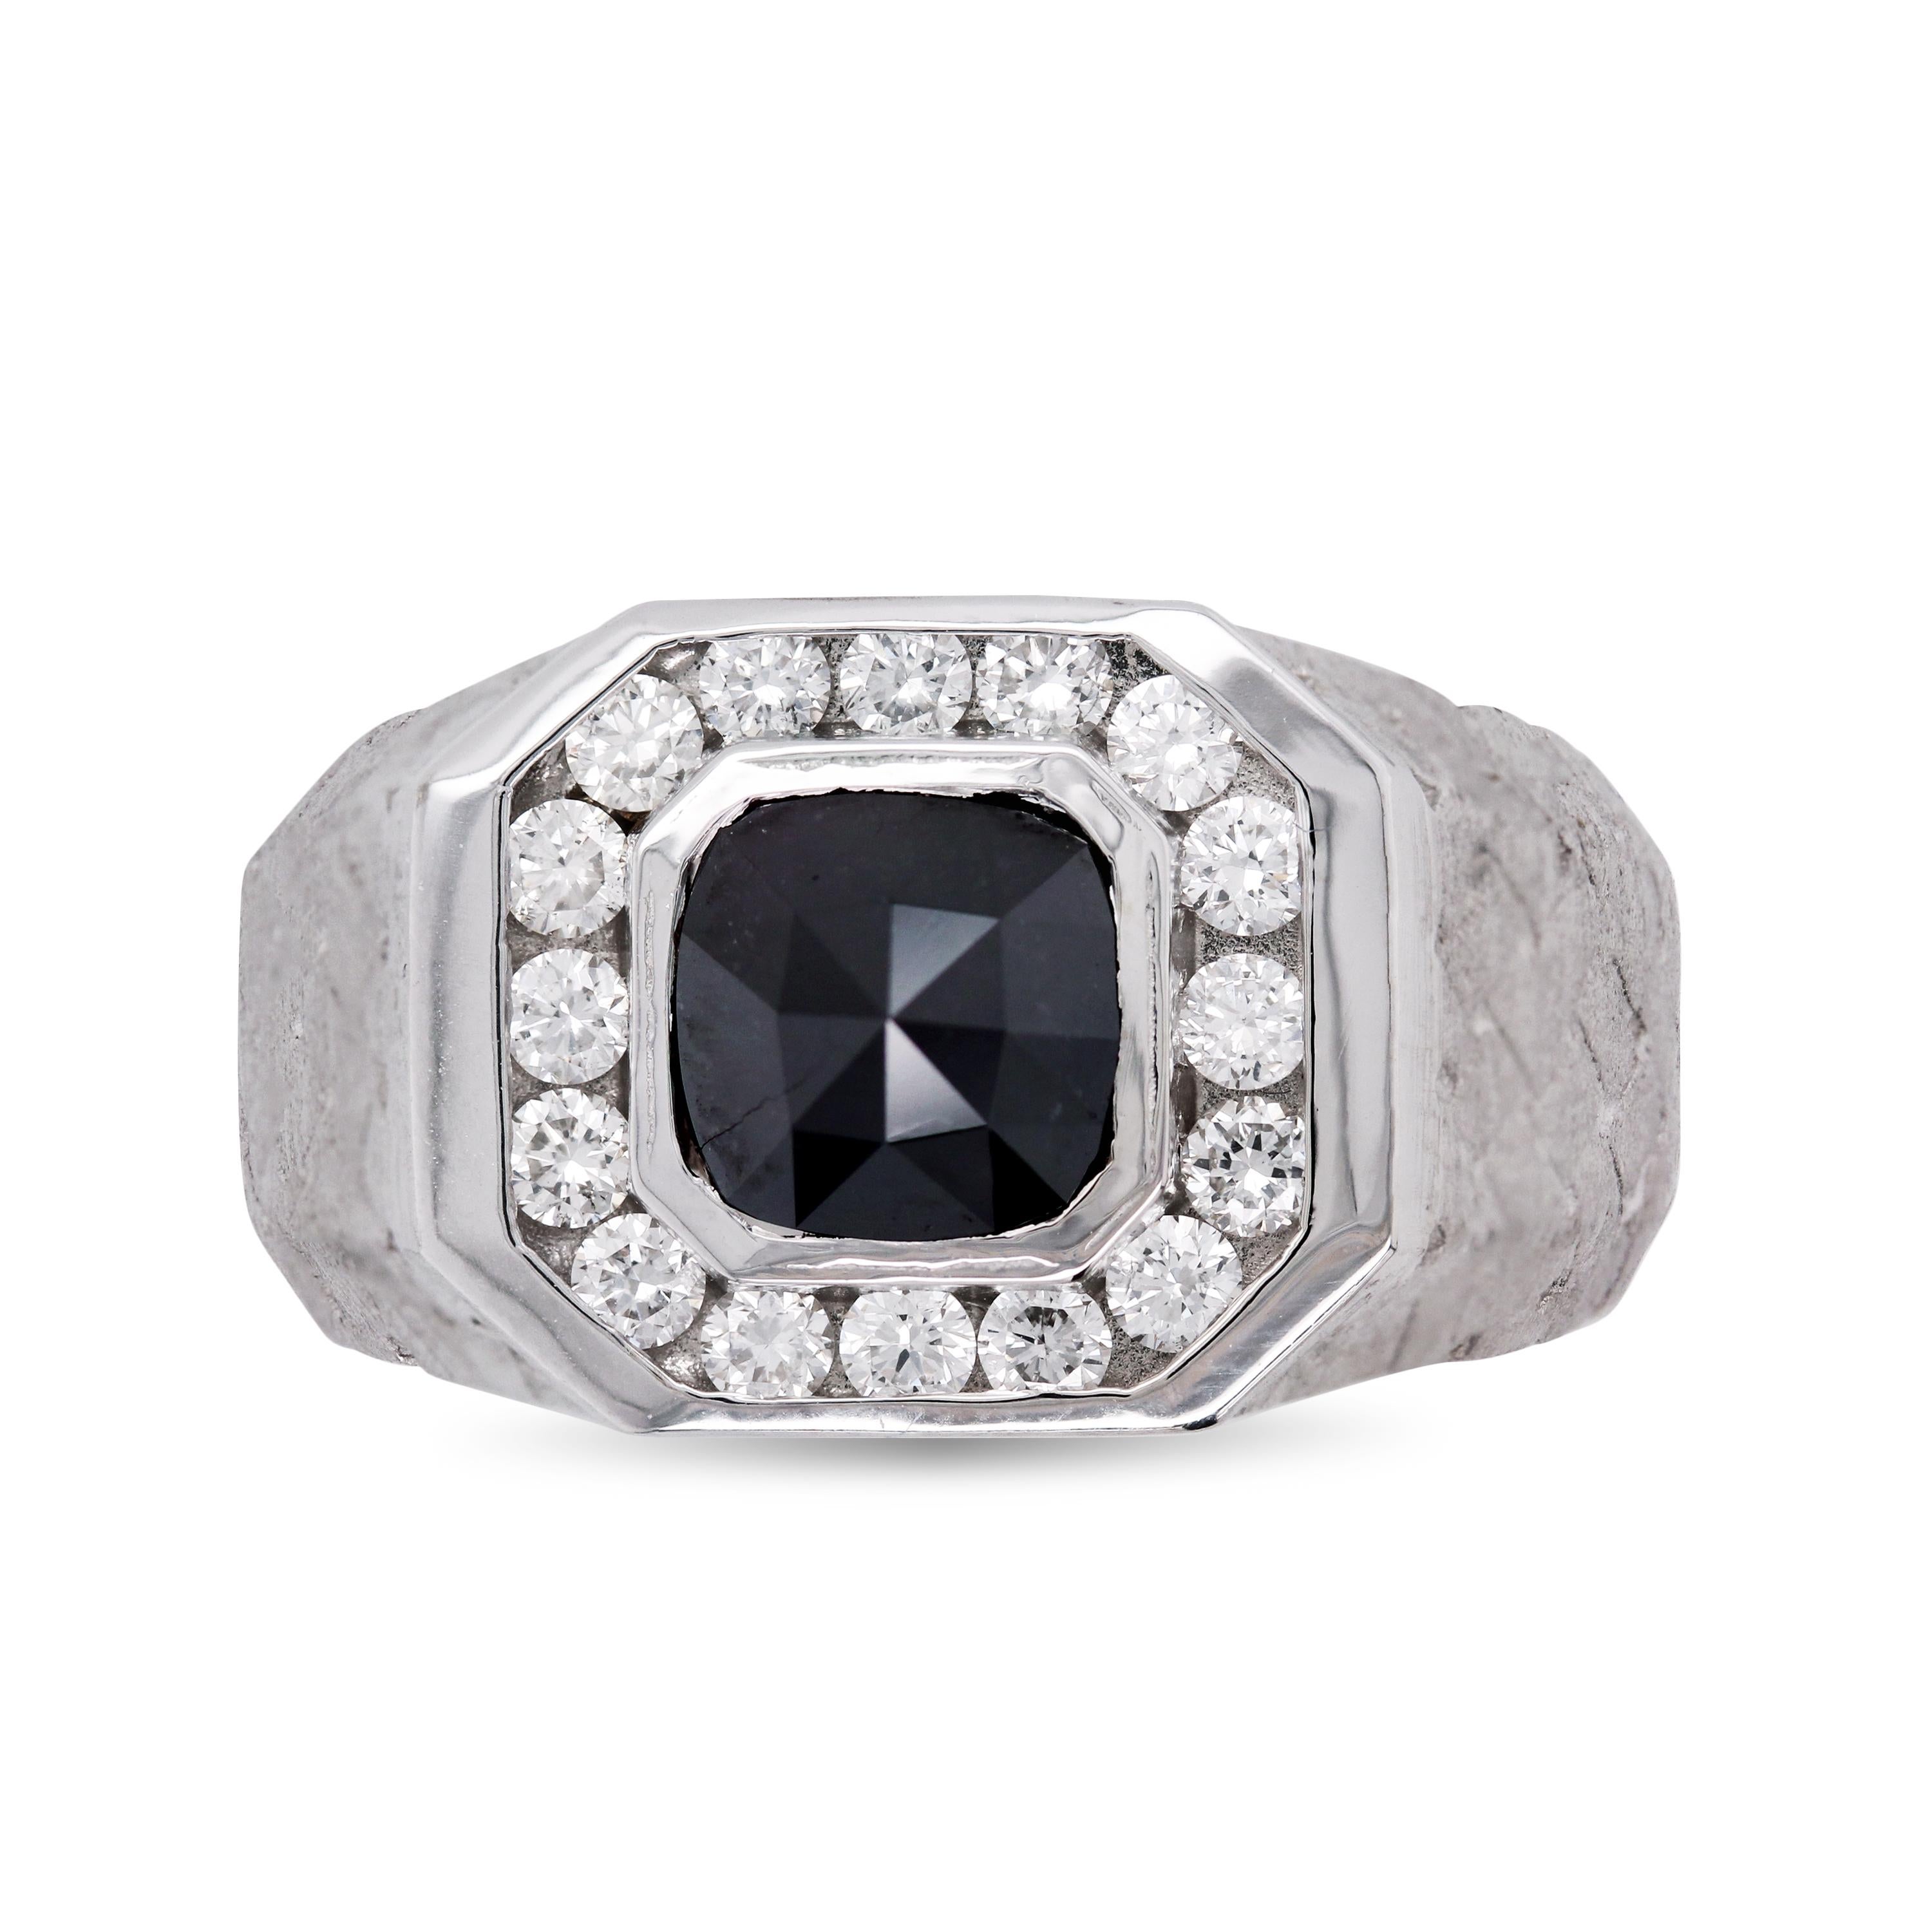 Stambolian 18K White Gold Black White Diamond Checkered Design Ring 

NO RESERVE PRICE

This mens ring from Stambolian features textured, brushed white gold finish on both sides and the center is Black Diamond surrounded by diamonds

0.48 carat G